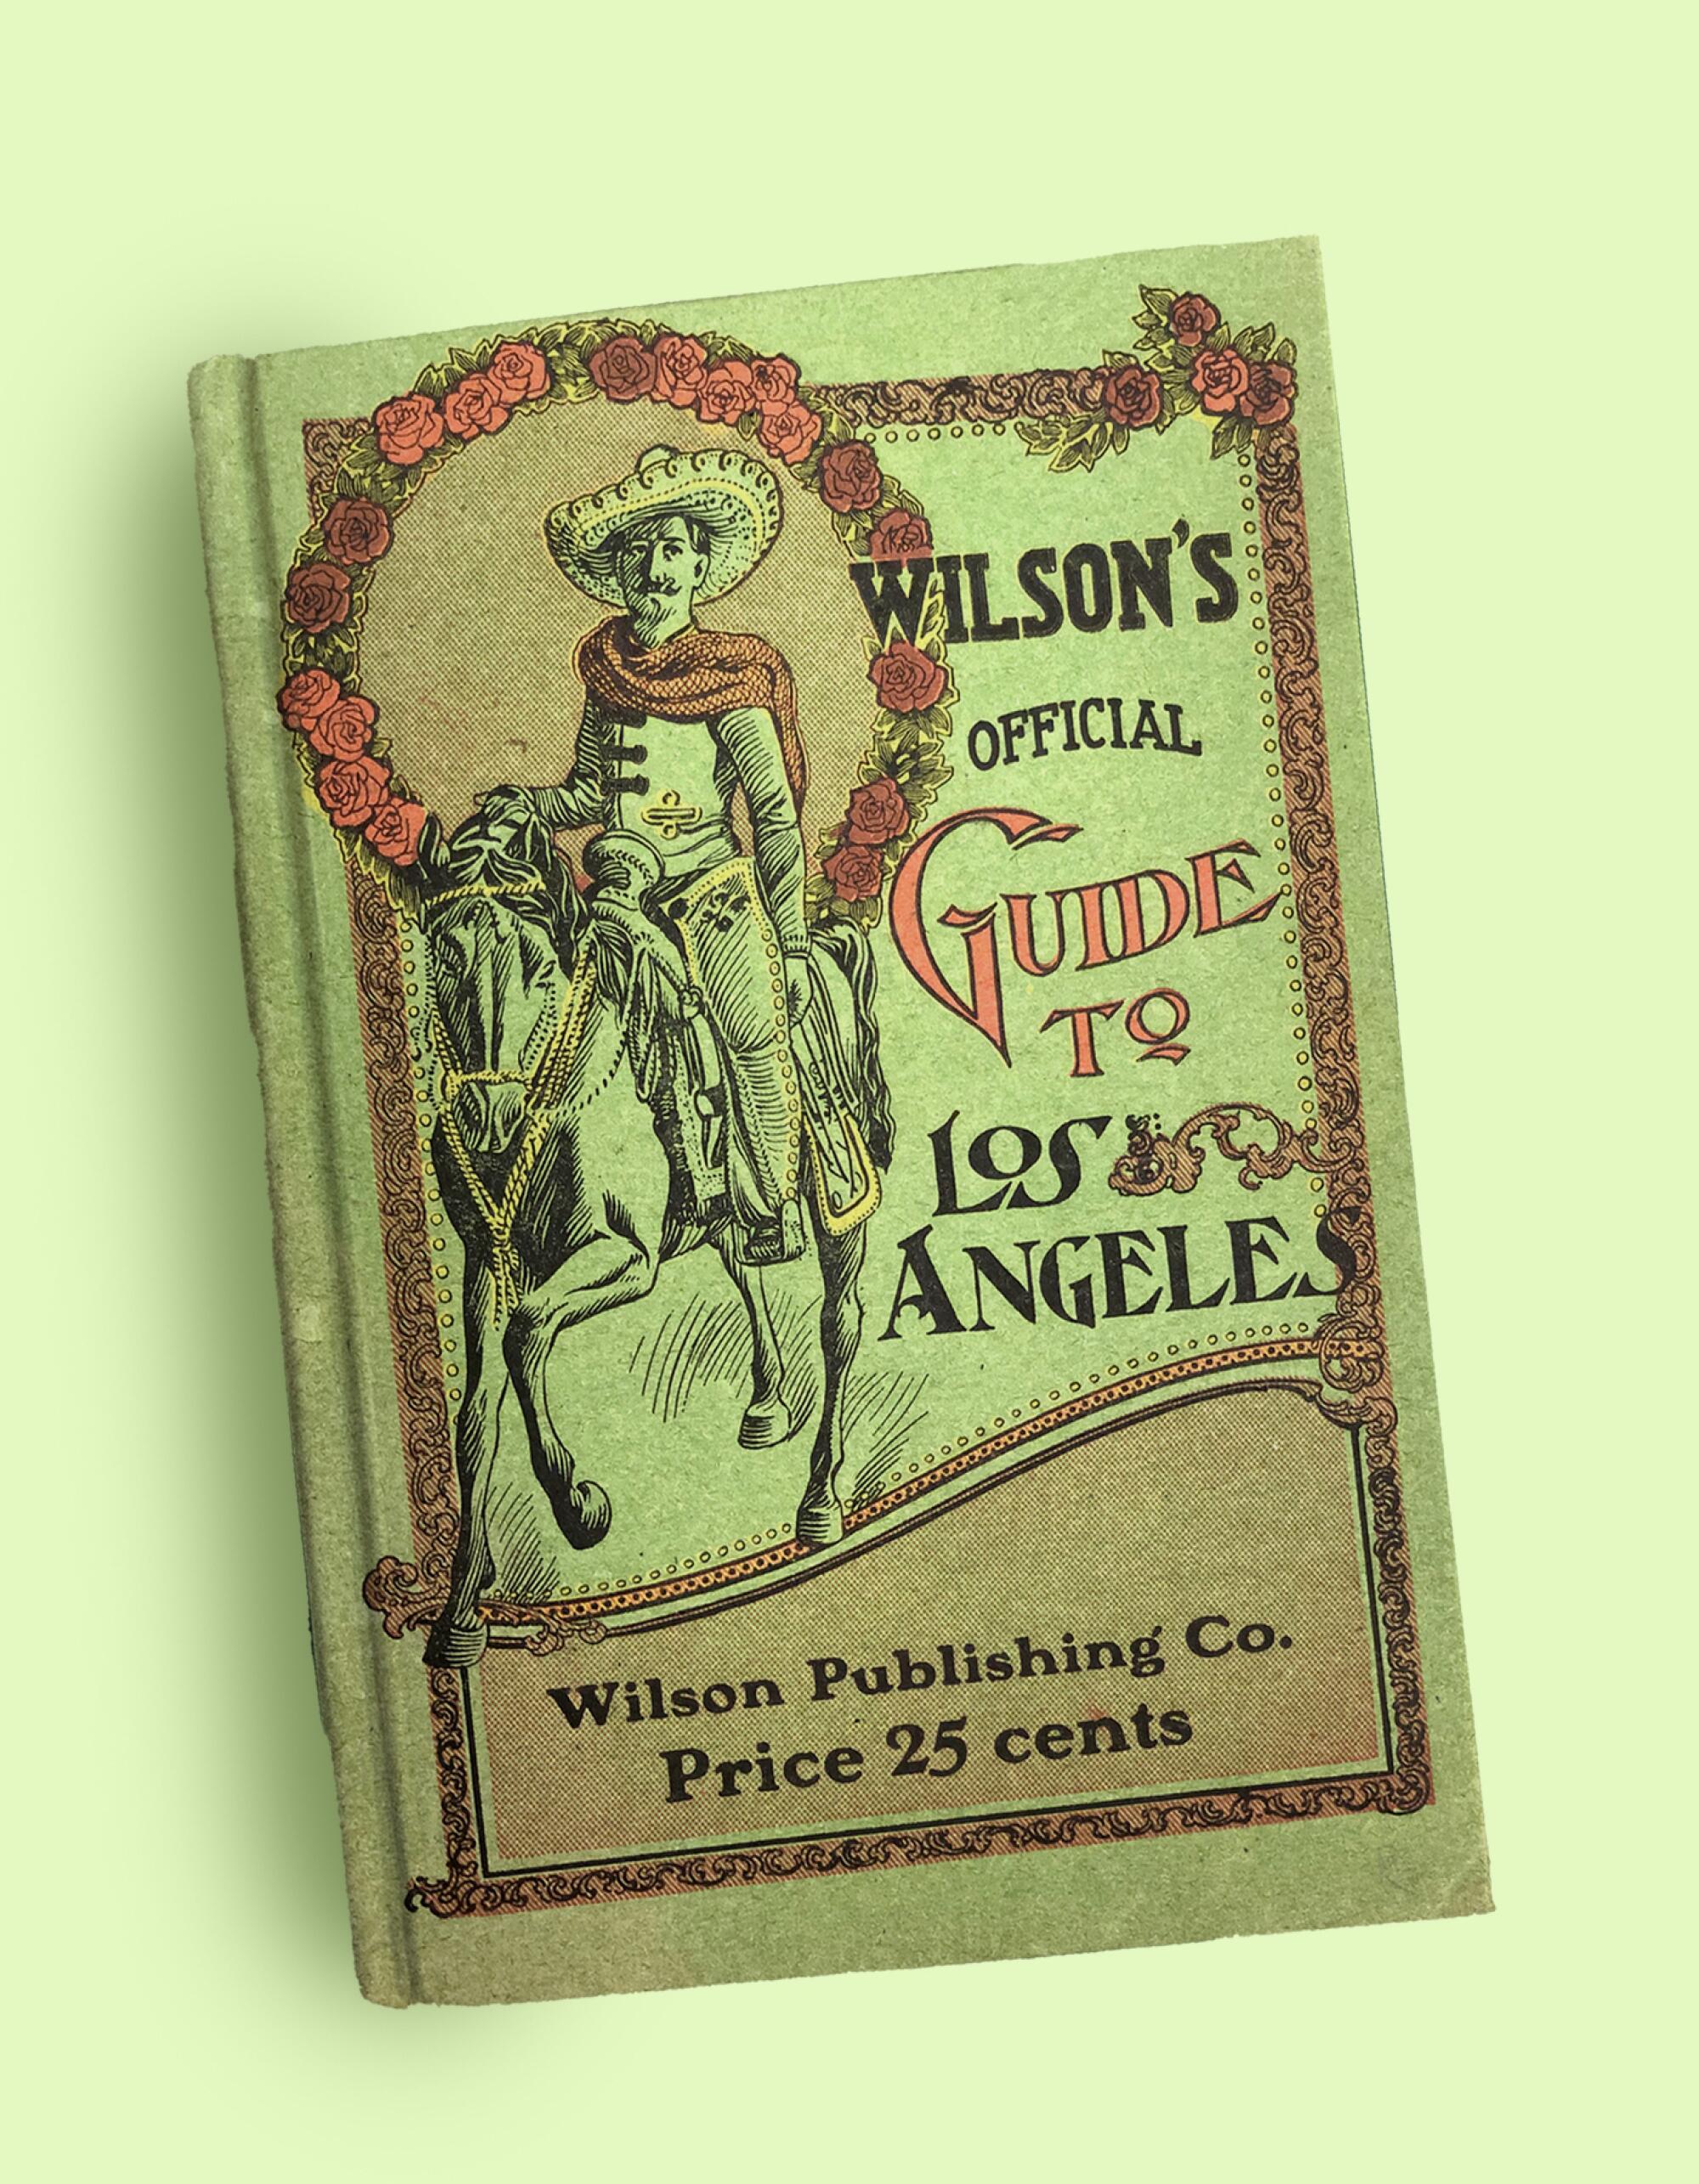  “Wilson’s Official Guide to Los Angeles,” 1901